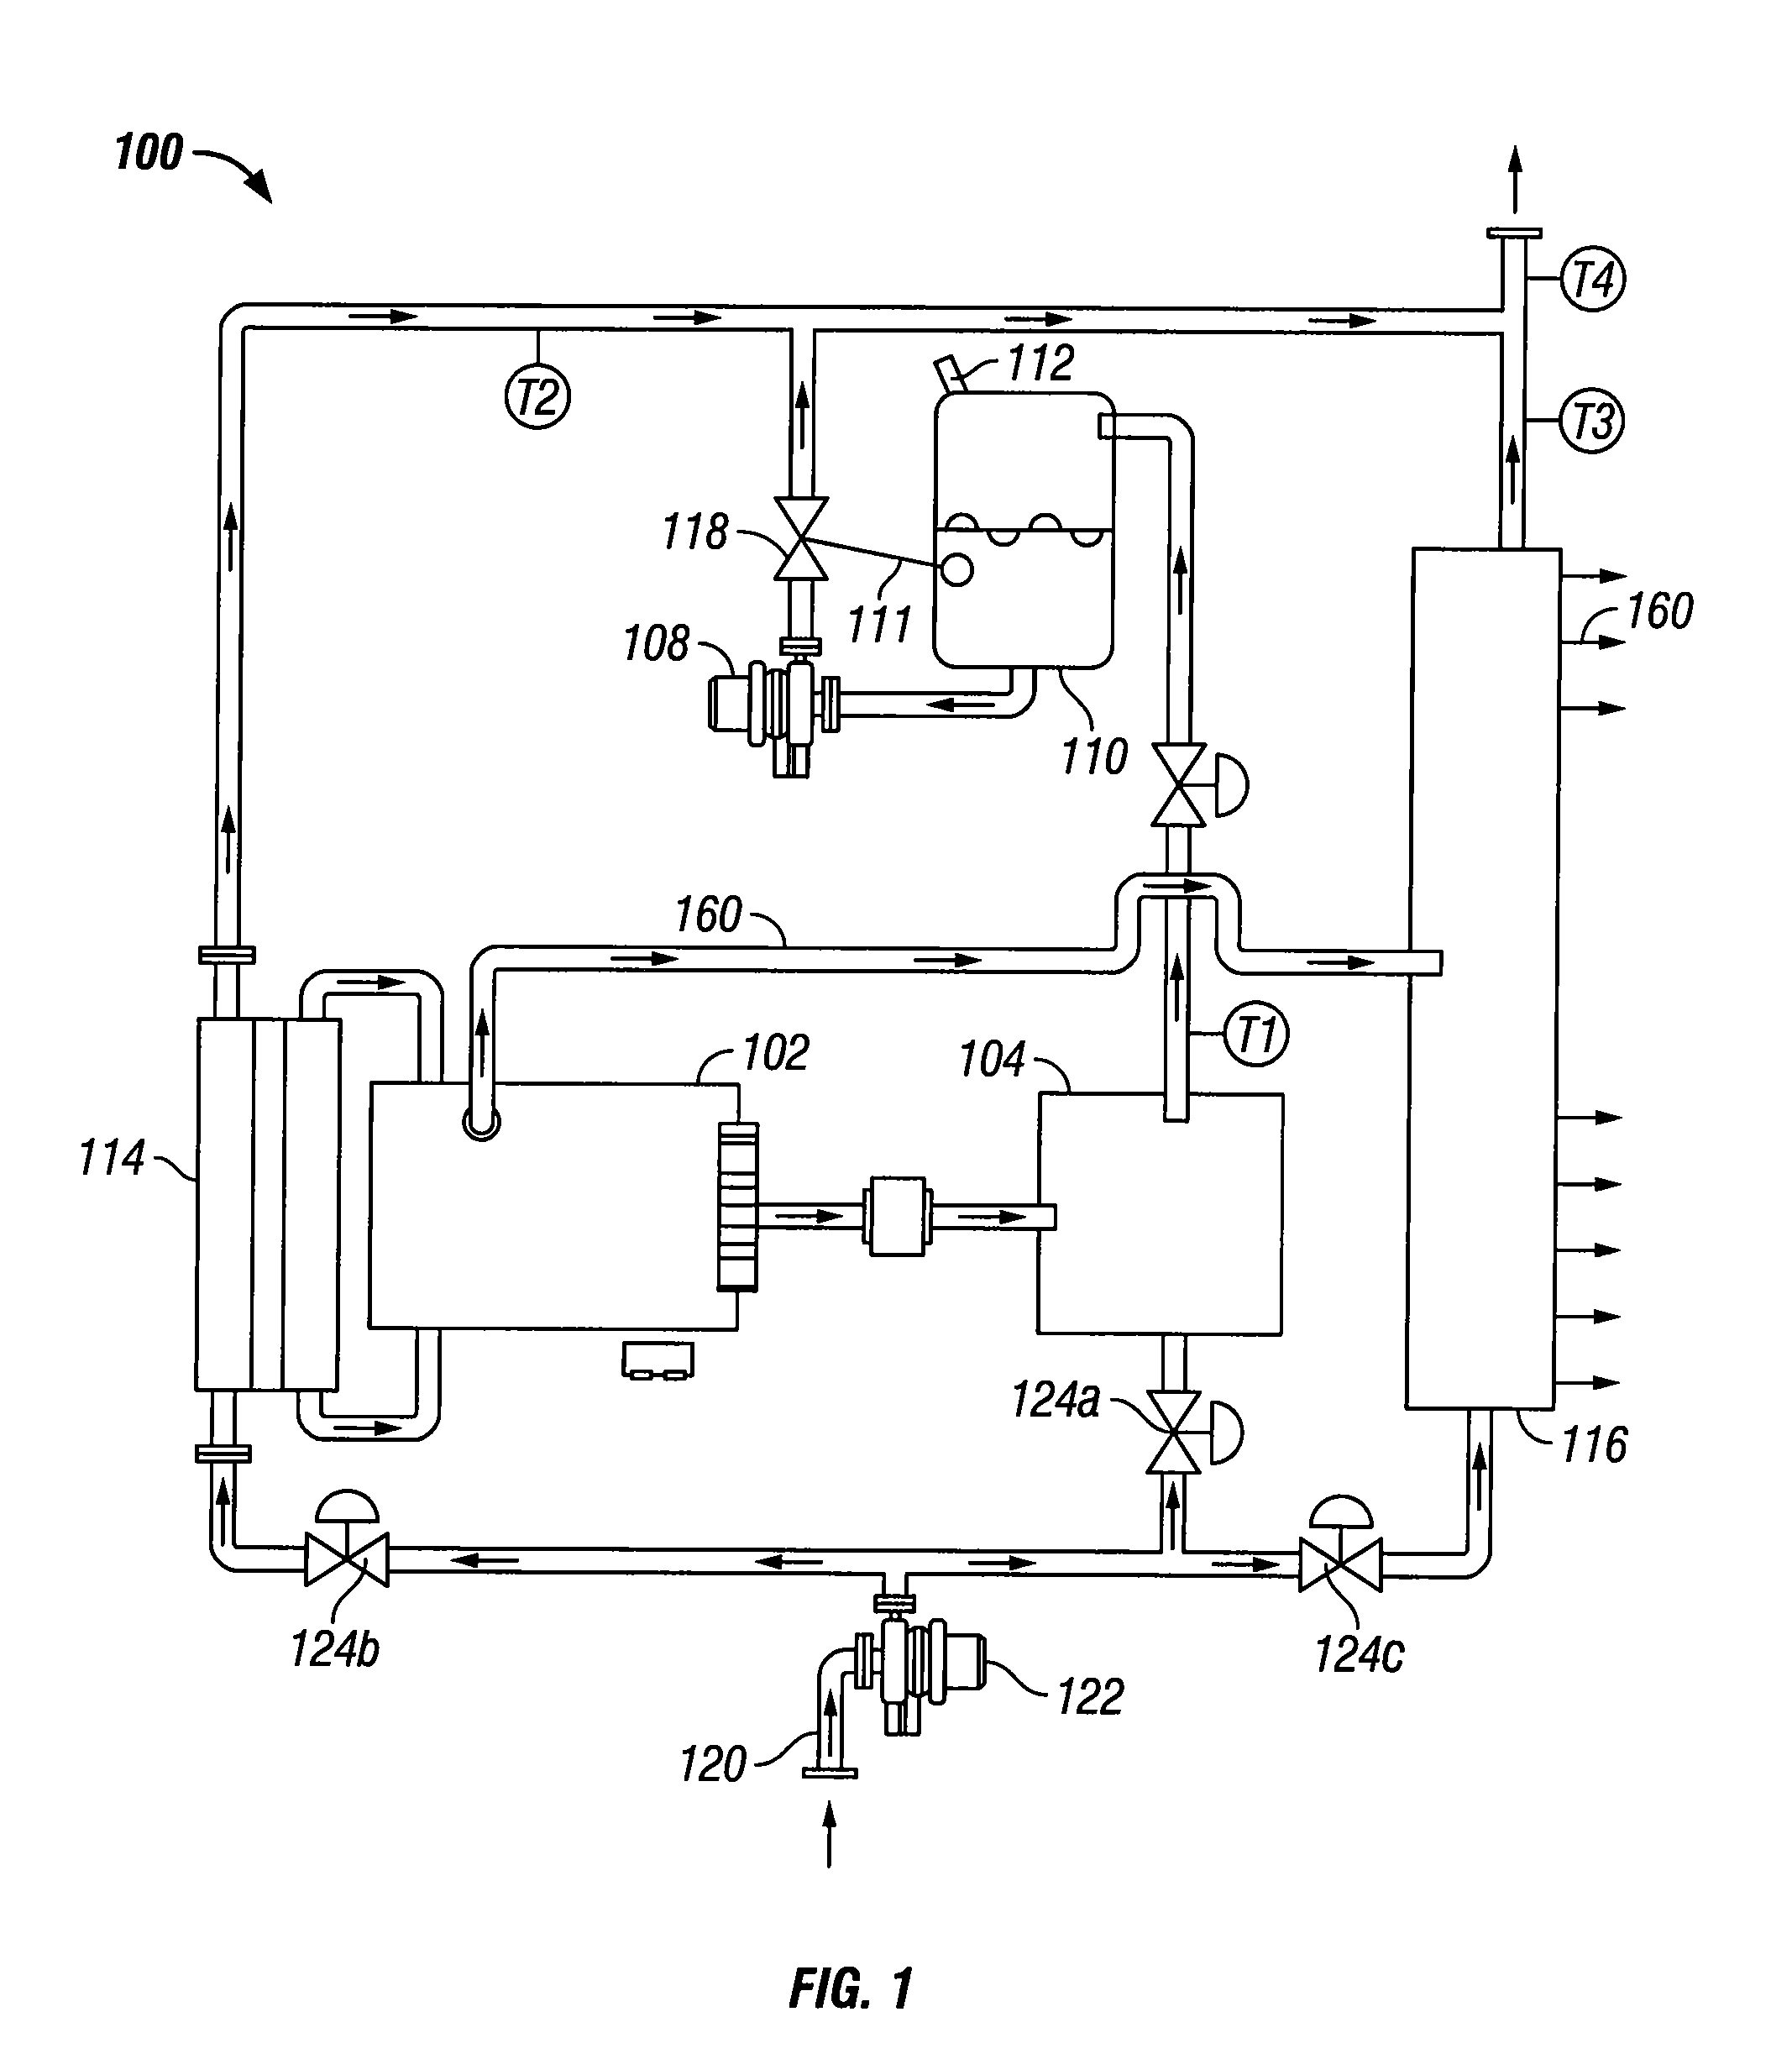 Methods and apparatuses for heating and manipulating fluid